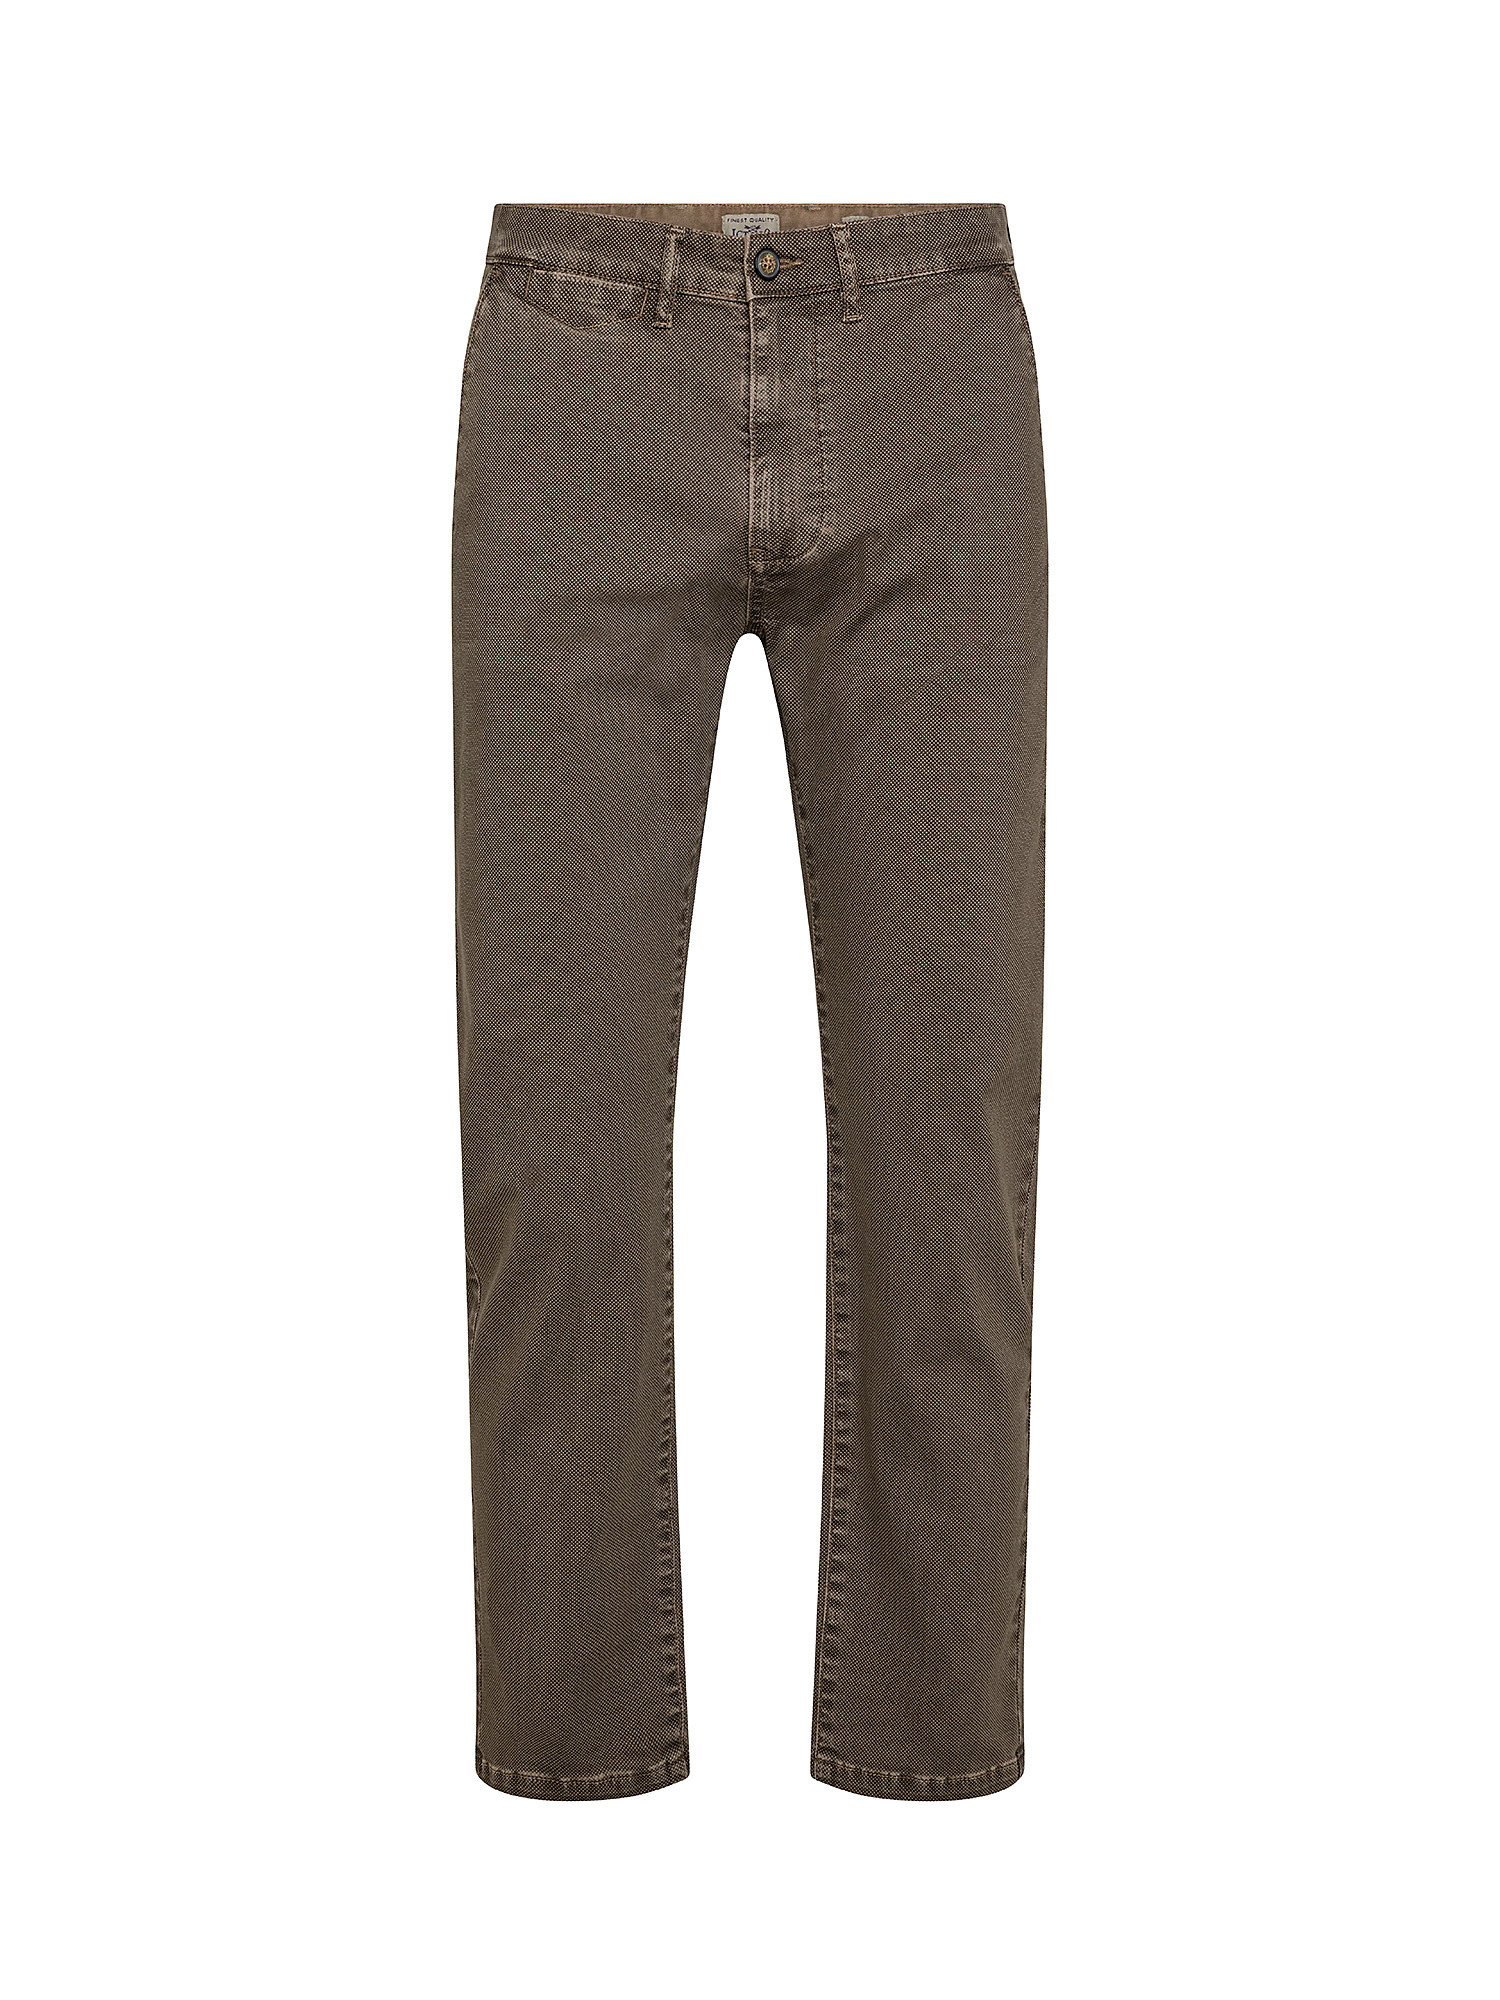 Pantalone chinos in cotone stretch, Marrone, large image number 0